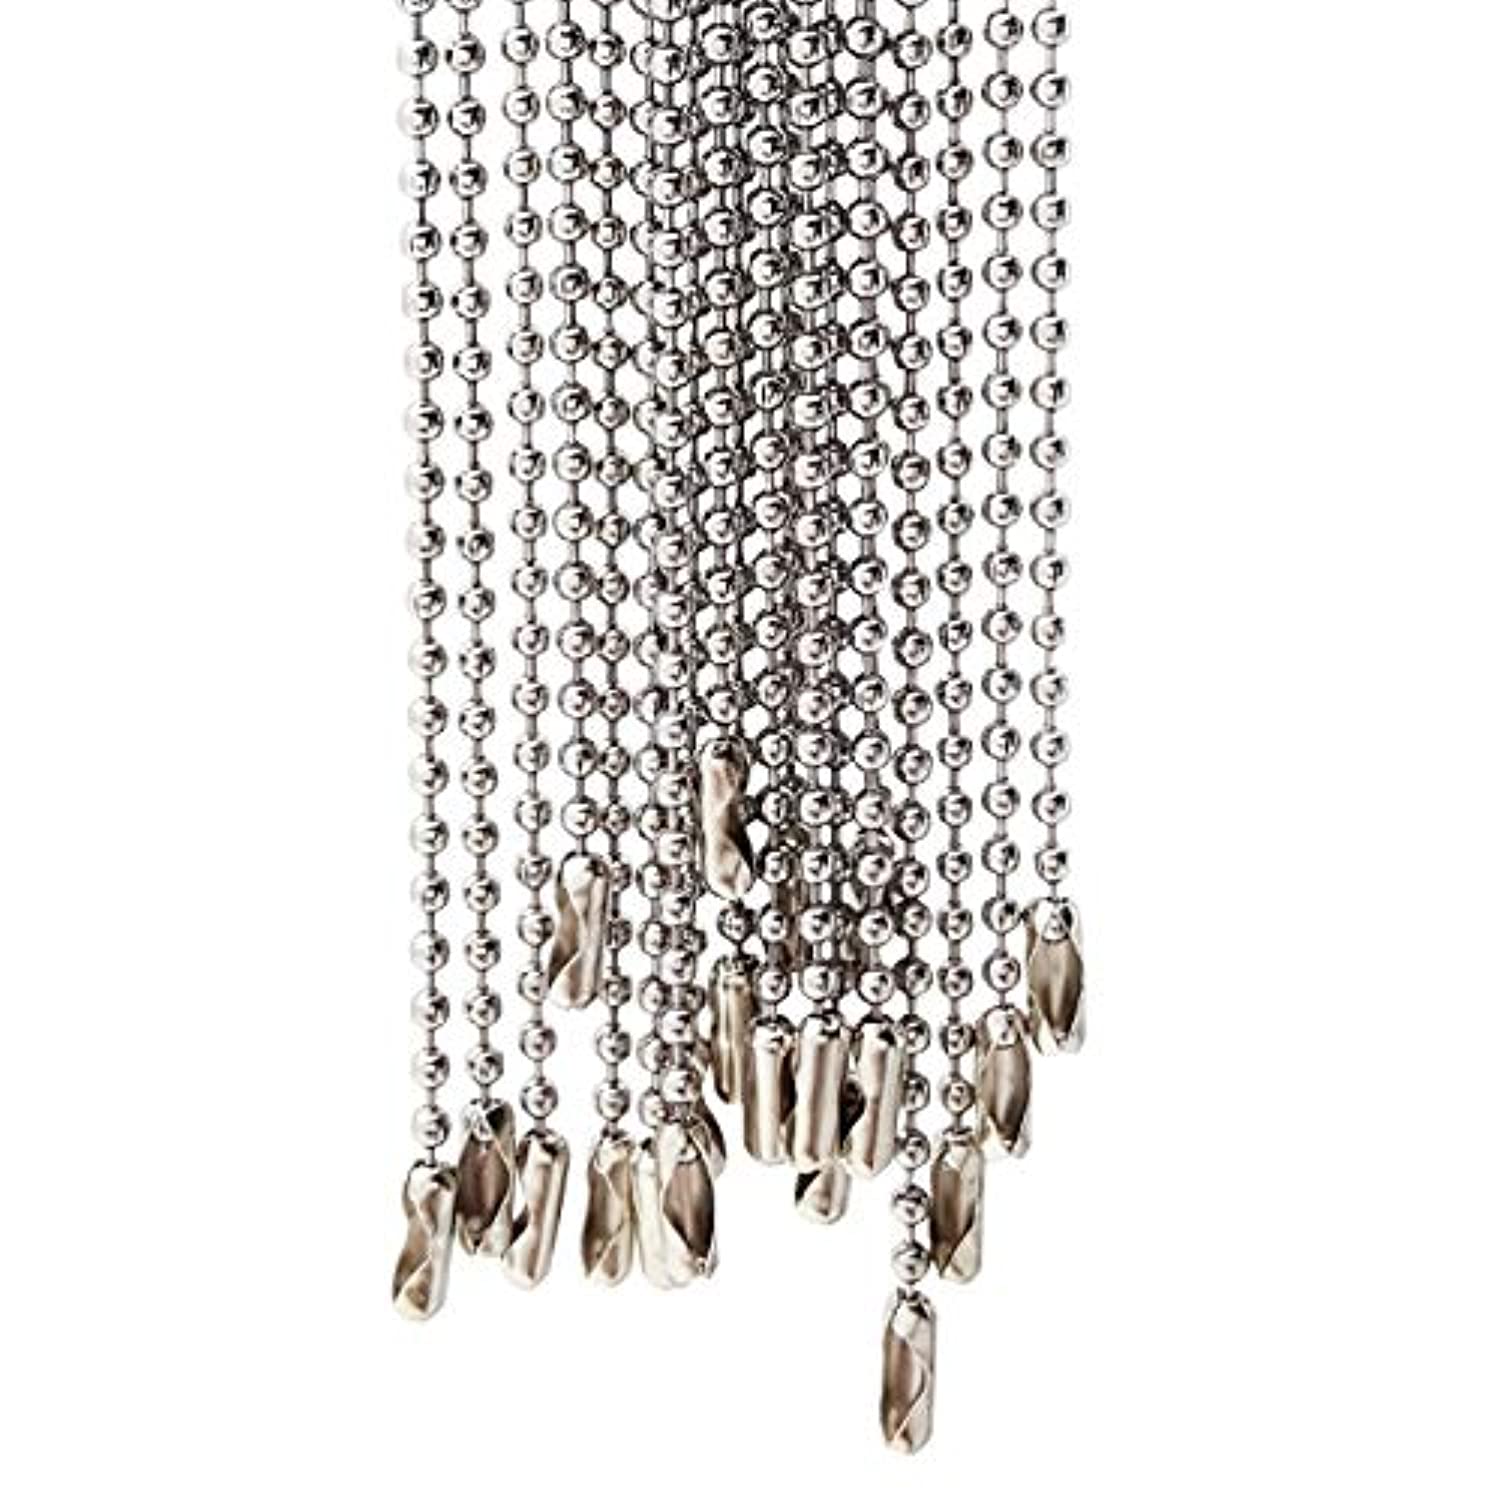 #3 Stainless Steel Ball Chains with Connector - 24 Inch Length